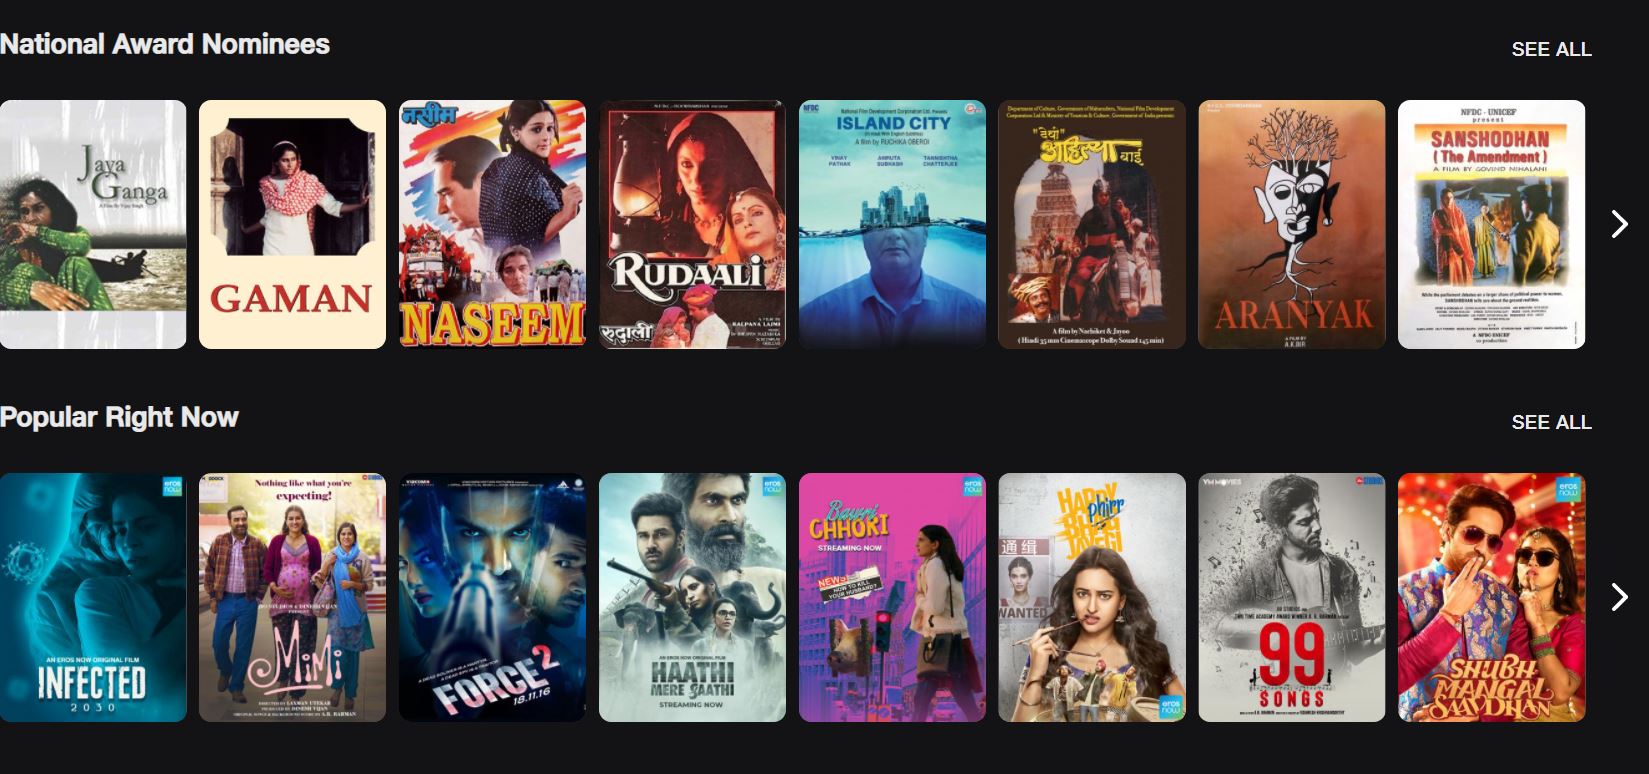 Screenshot of the National Award Nominees movies on jio cinema for laptop